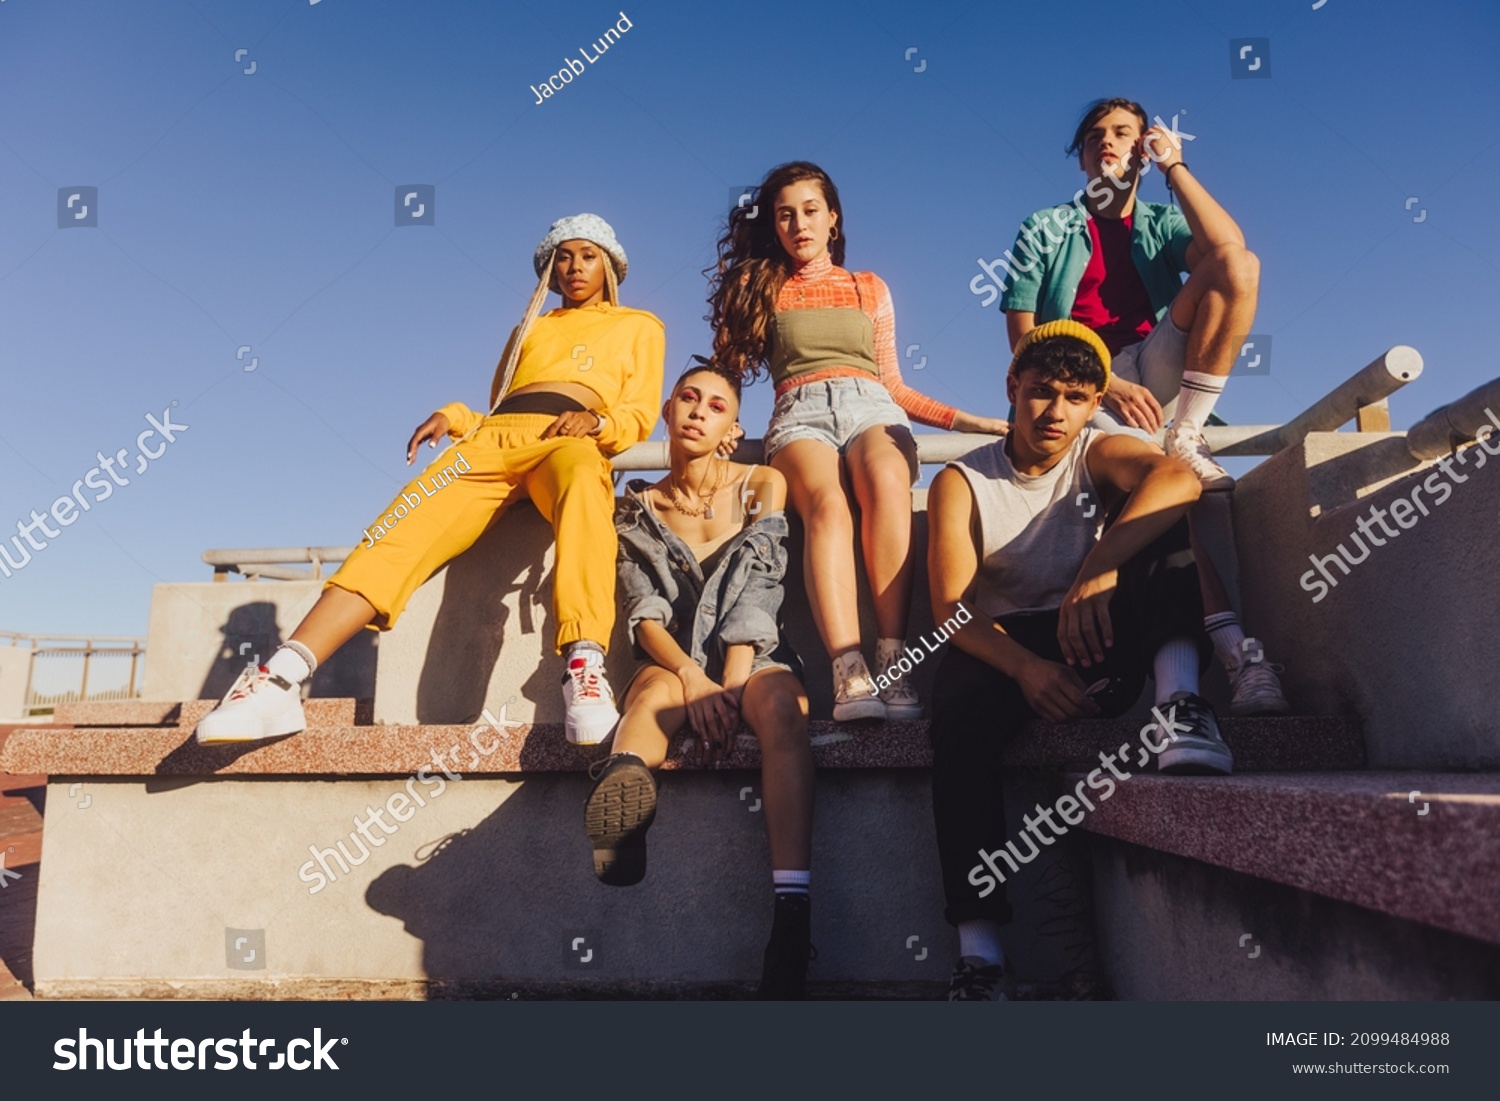 Group of friends sitting together outdoors in the sun. Multiethnic youngsters spending quality time together in the city. Group of generation z friends chilling outdoors. #2099484988